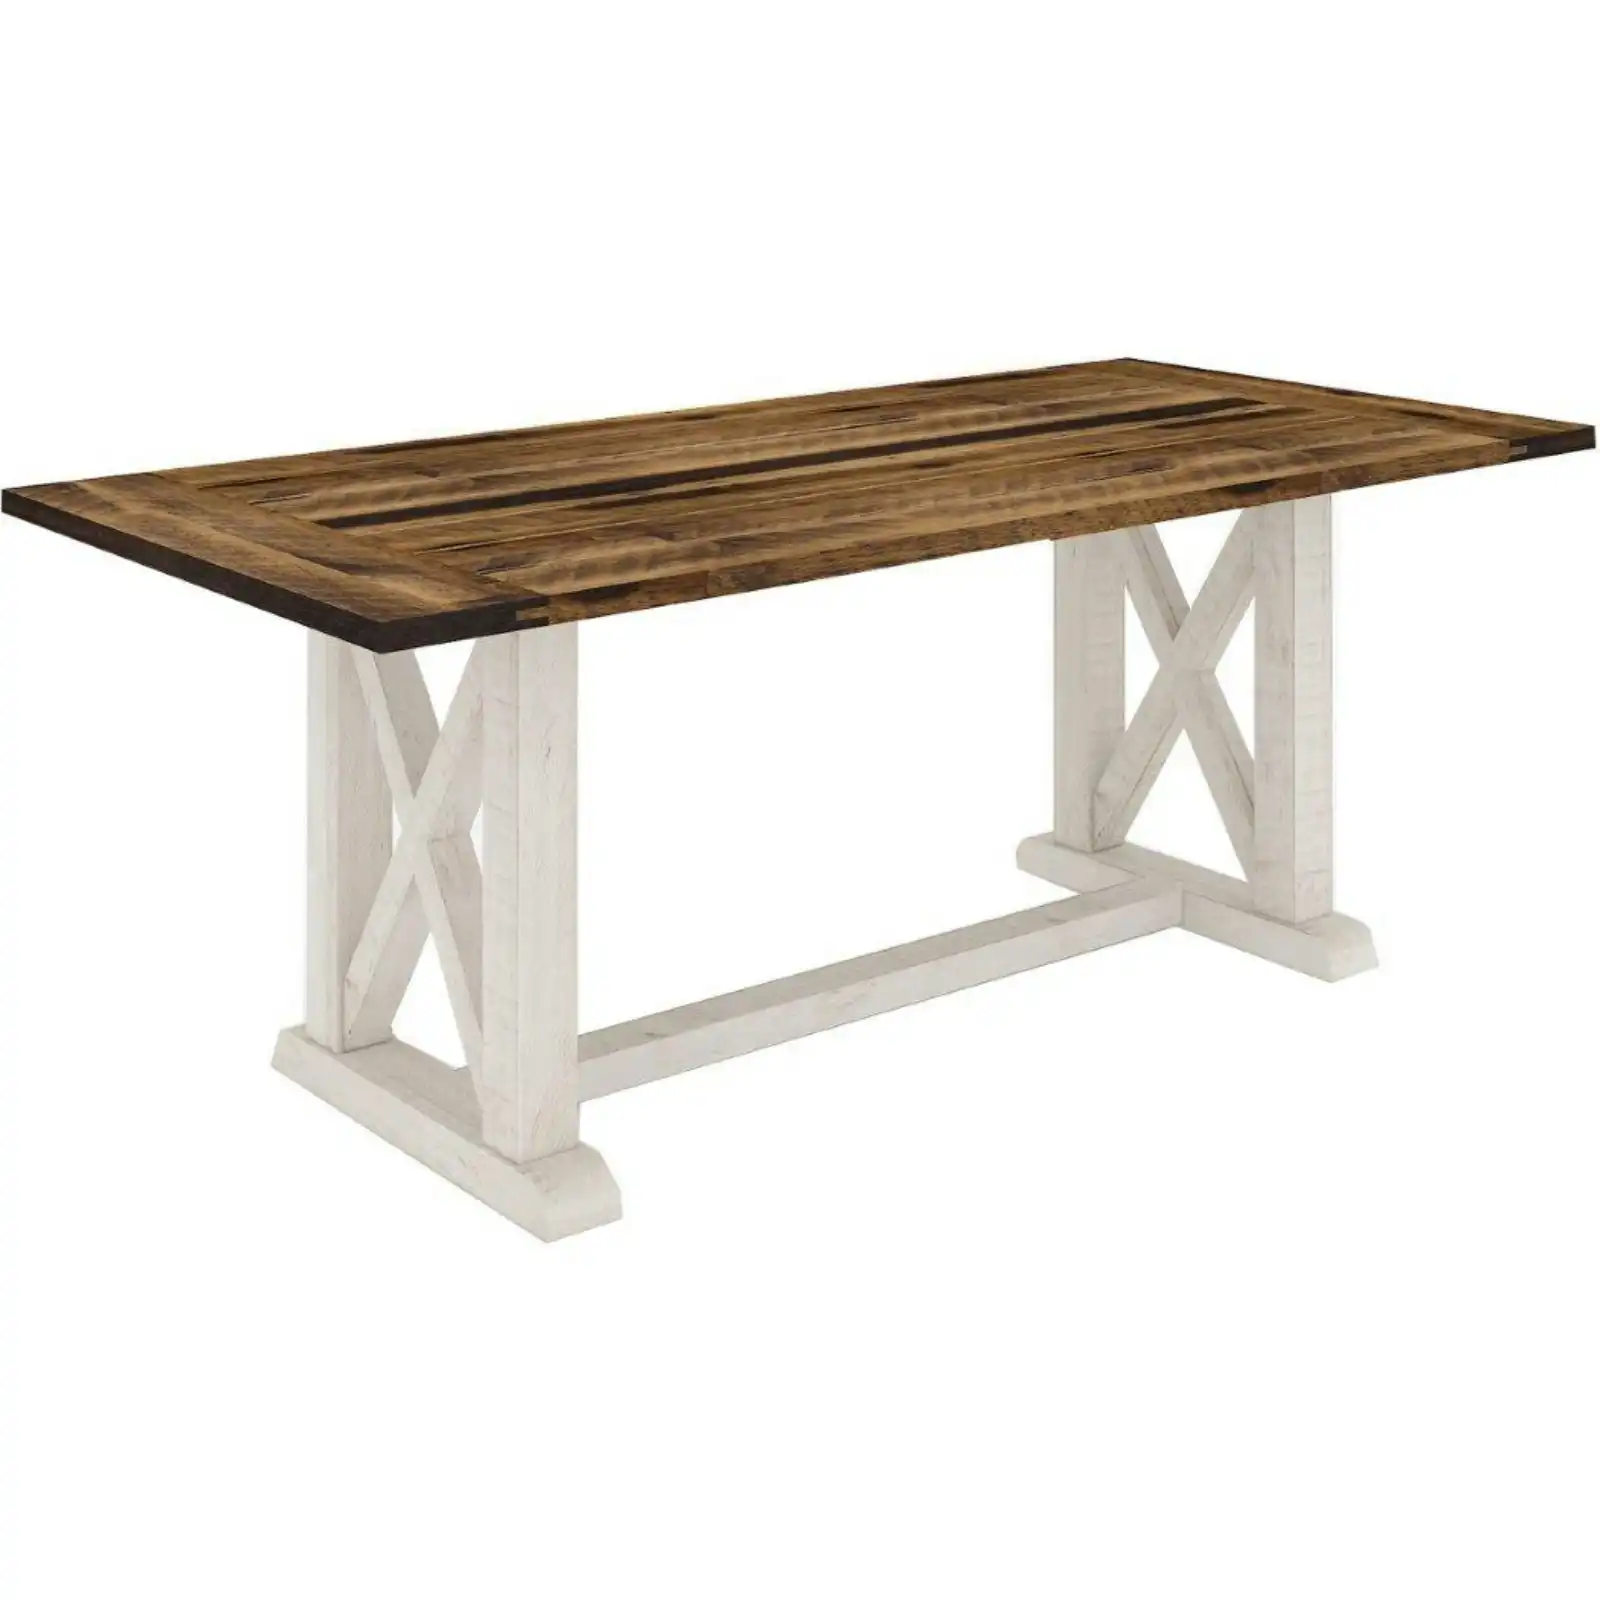 Erica 200cm Dining Table